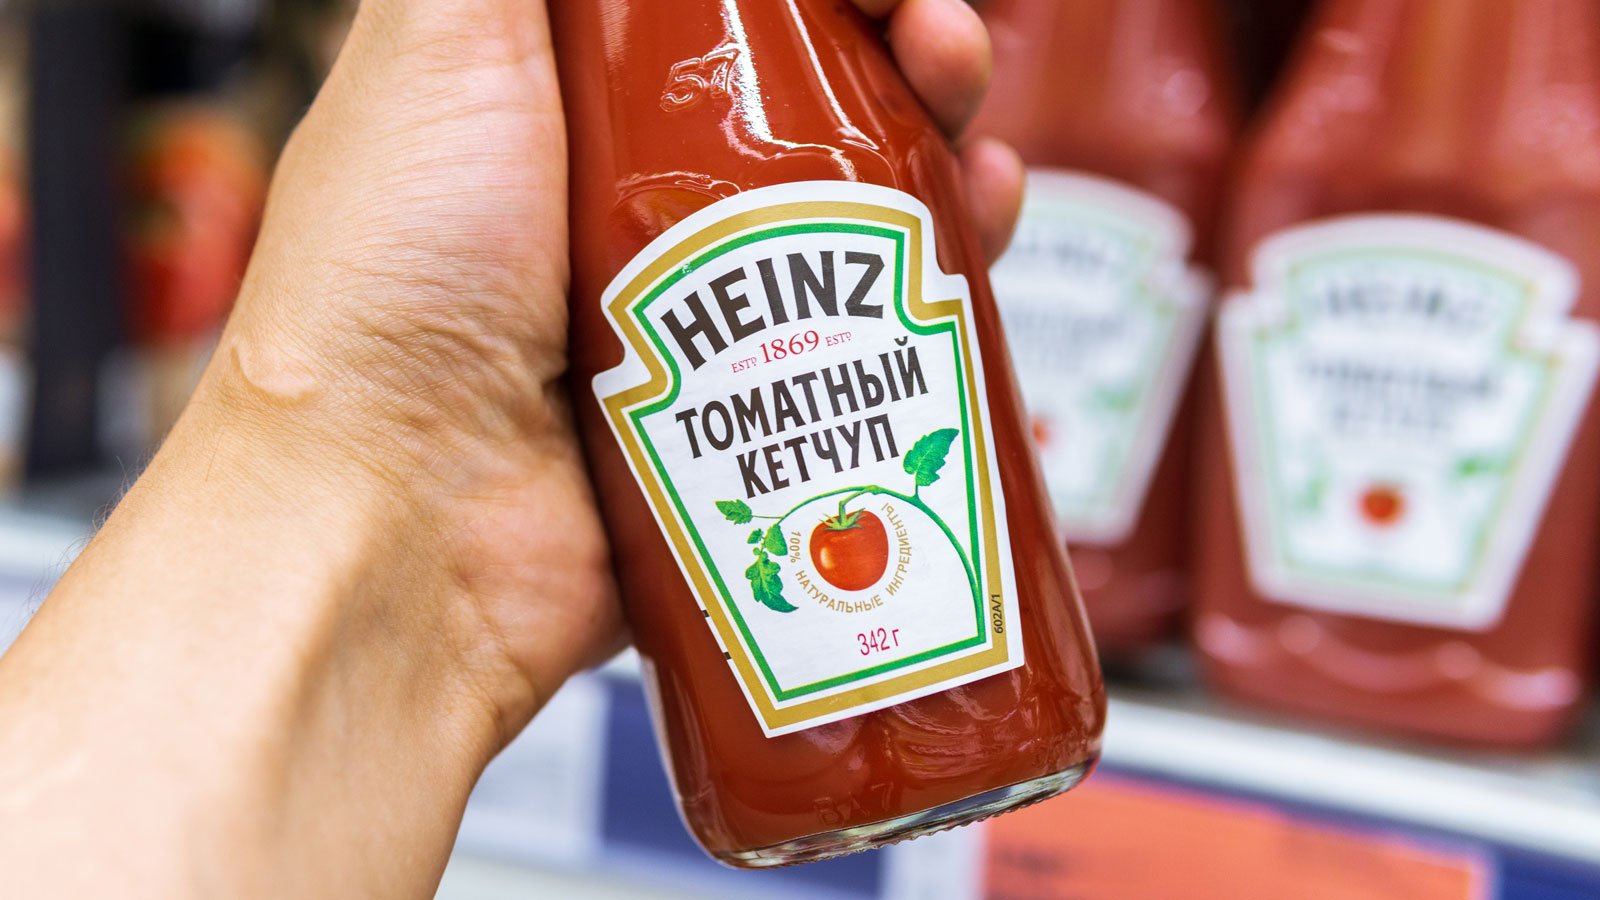 Kraft Heinz investigates hack claims, says systems ‘operating normally’